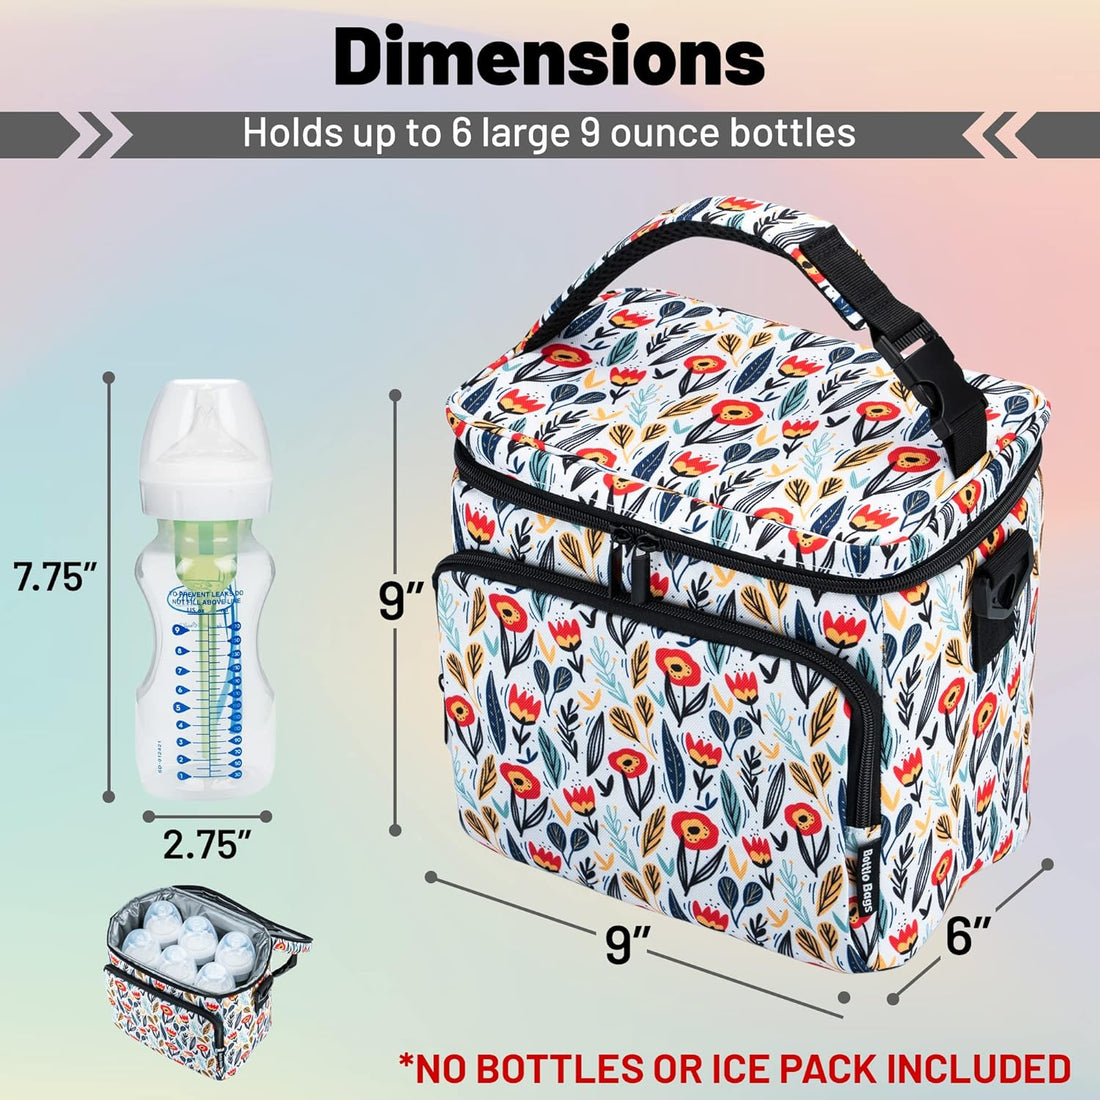 Insulated Breastmilk Cooler Bag With 3 Pockets - Waterproof Baby Bottle Cooler Bag Can Hold 6 Large 9 Ounce Bottles - The Perfect Tote Bottle Bag For Daycare, Nursing Moms, Travel - Spring